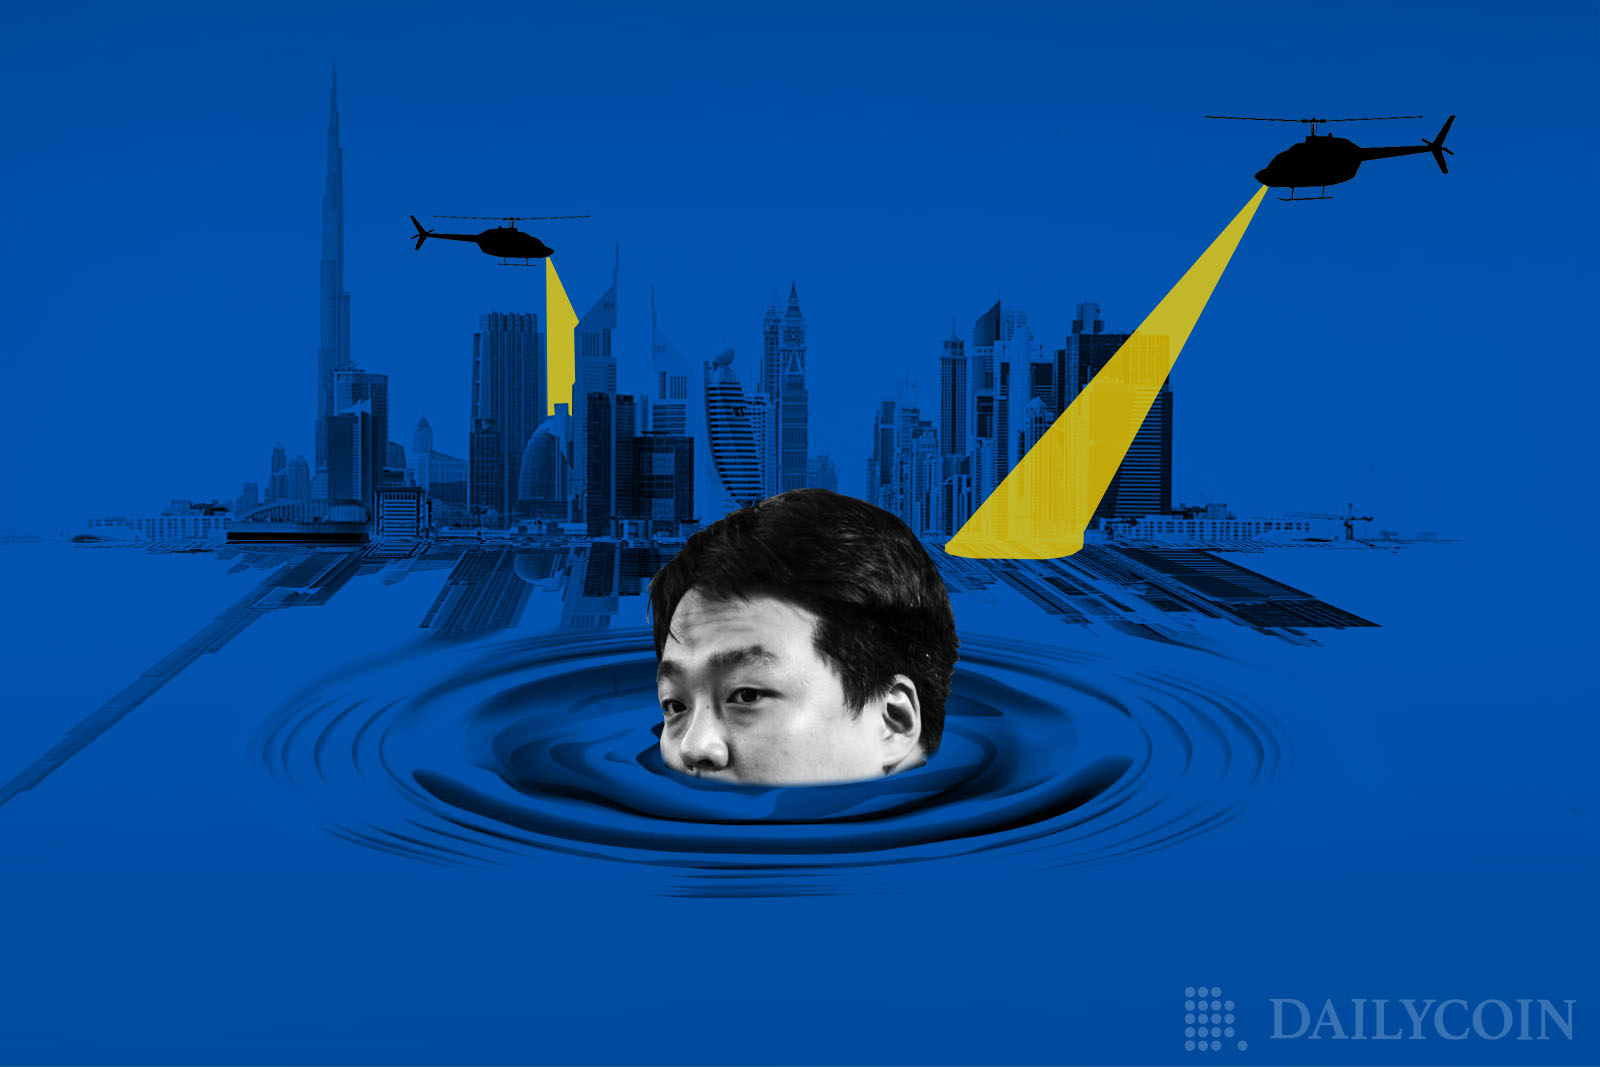 do kwon_dubai_hiding_under water_searchlights_helicopter_fugitive